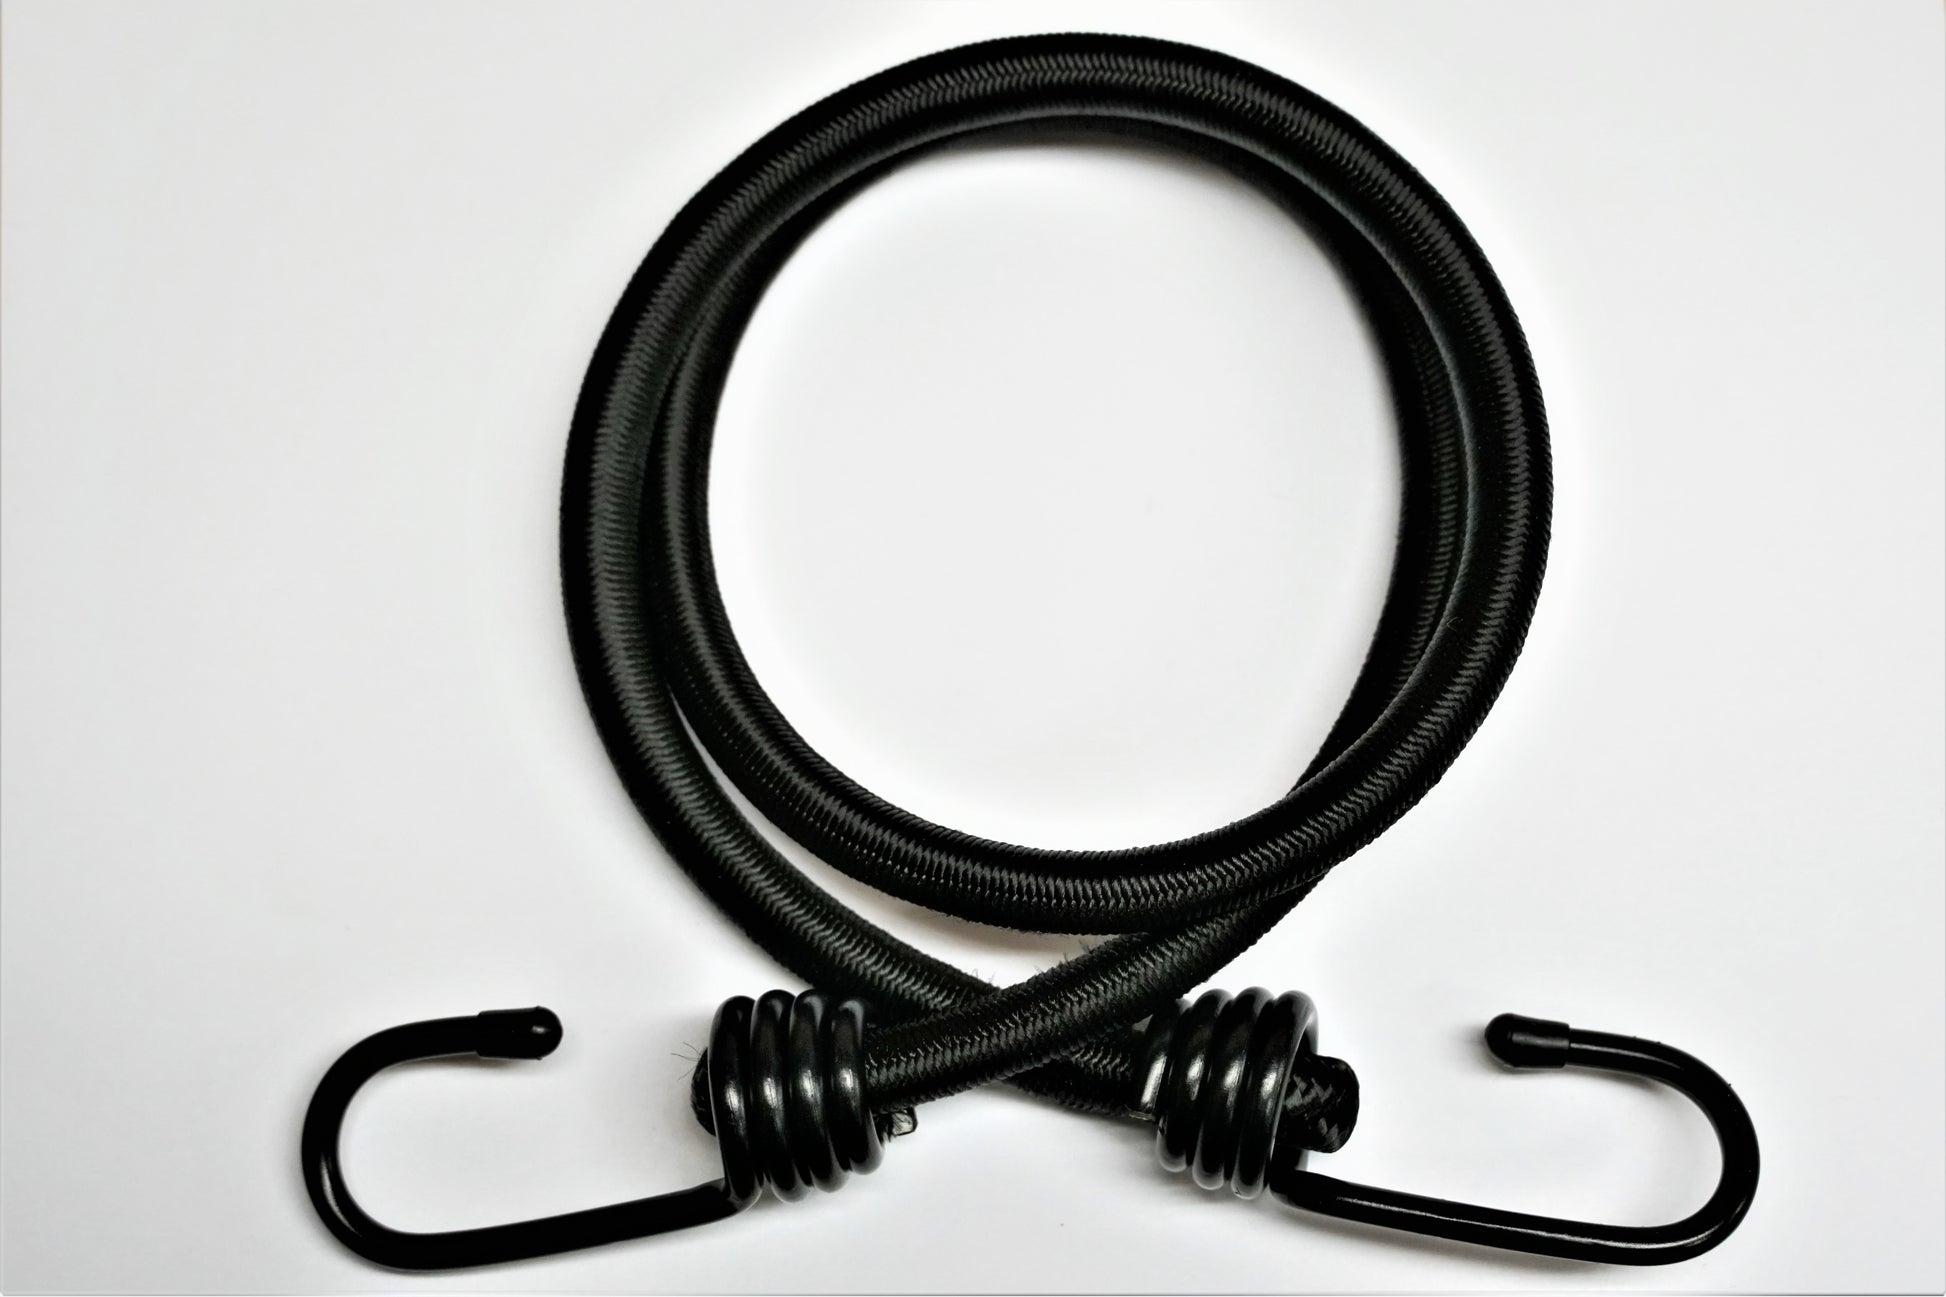 Panther Shock Cord/Bungee cord - shop.cmpgroup.net